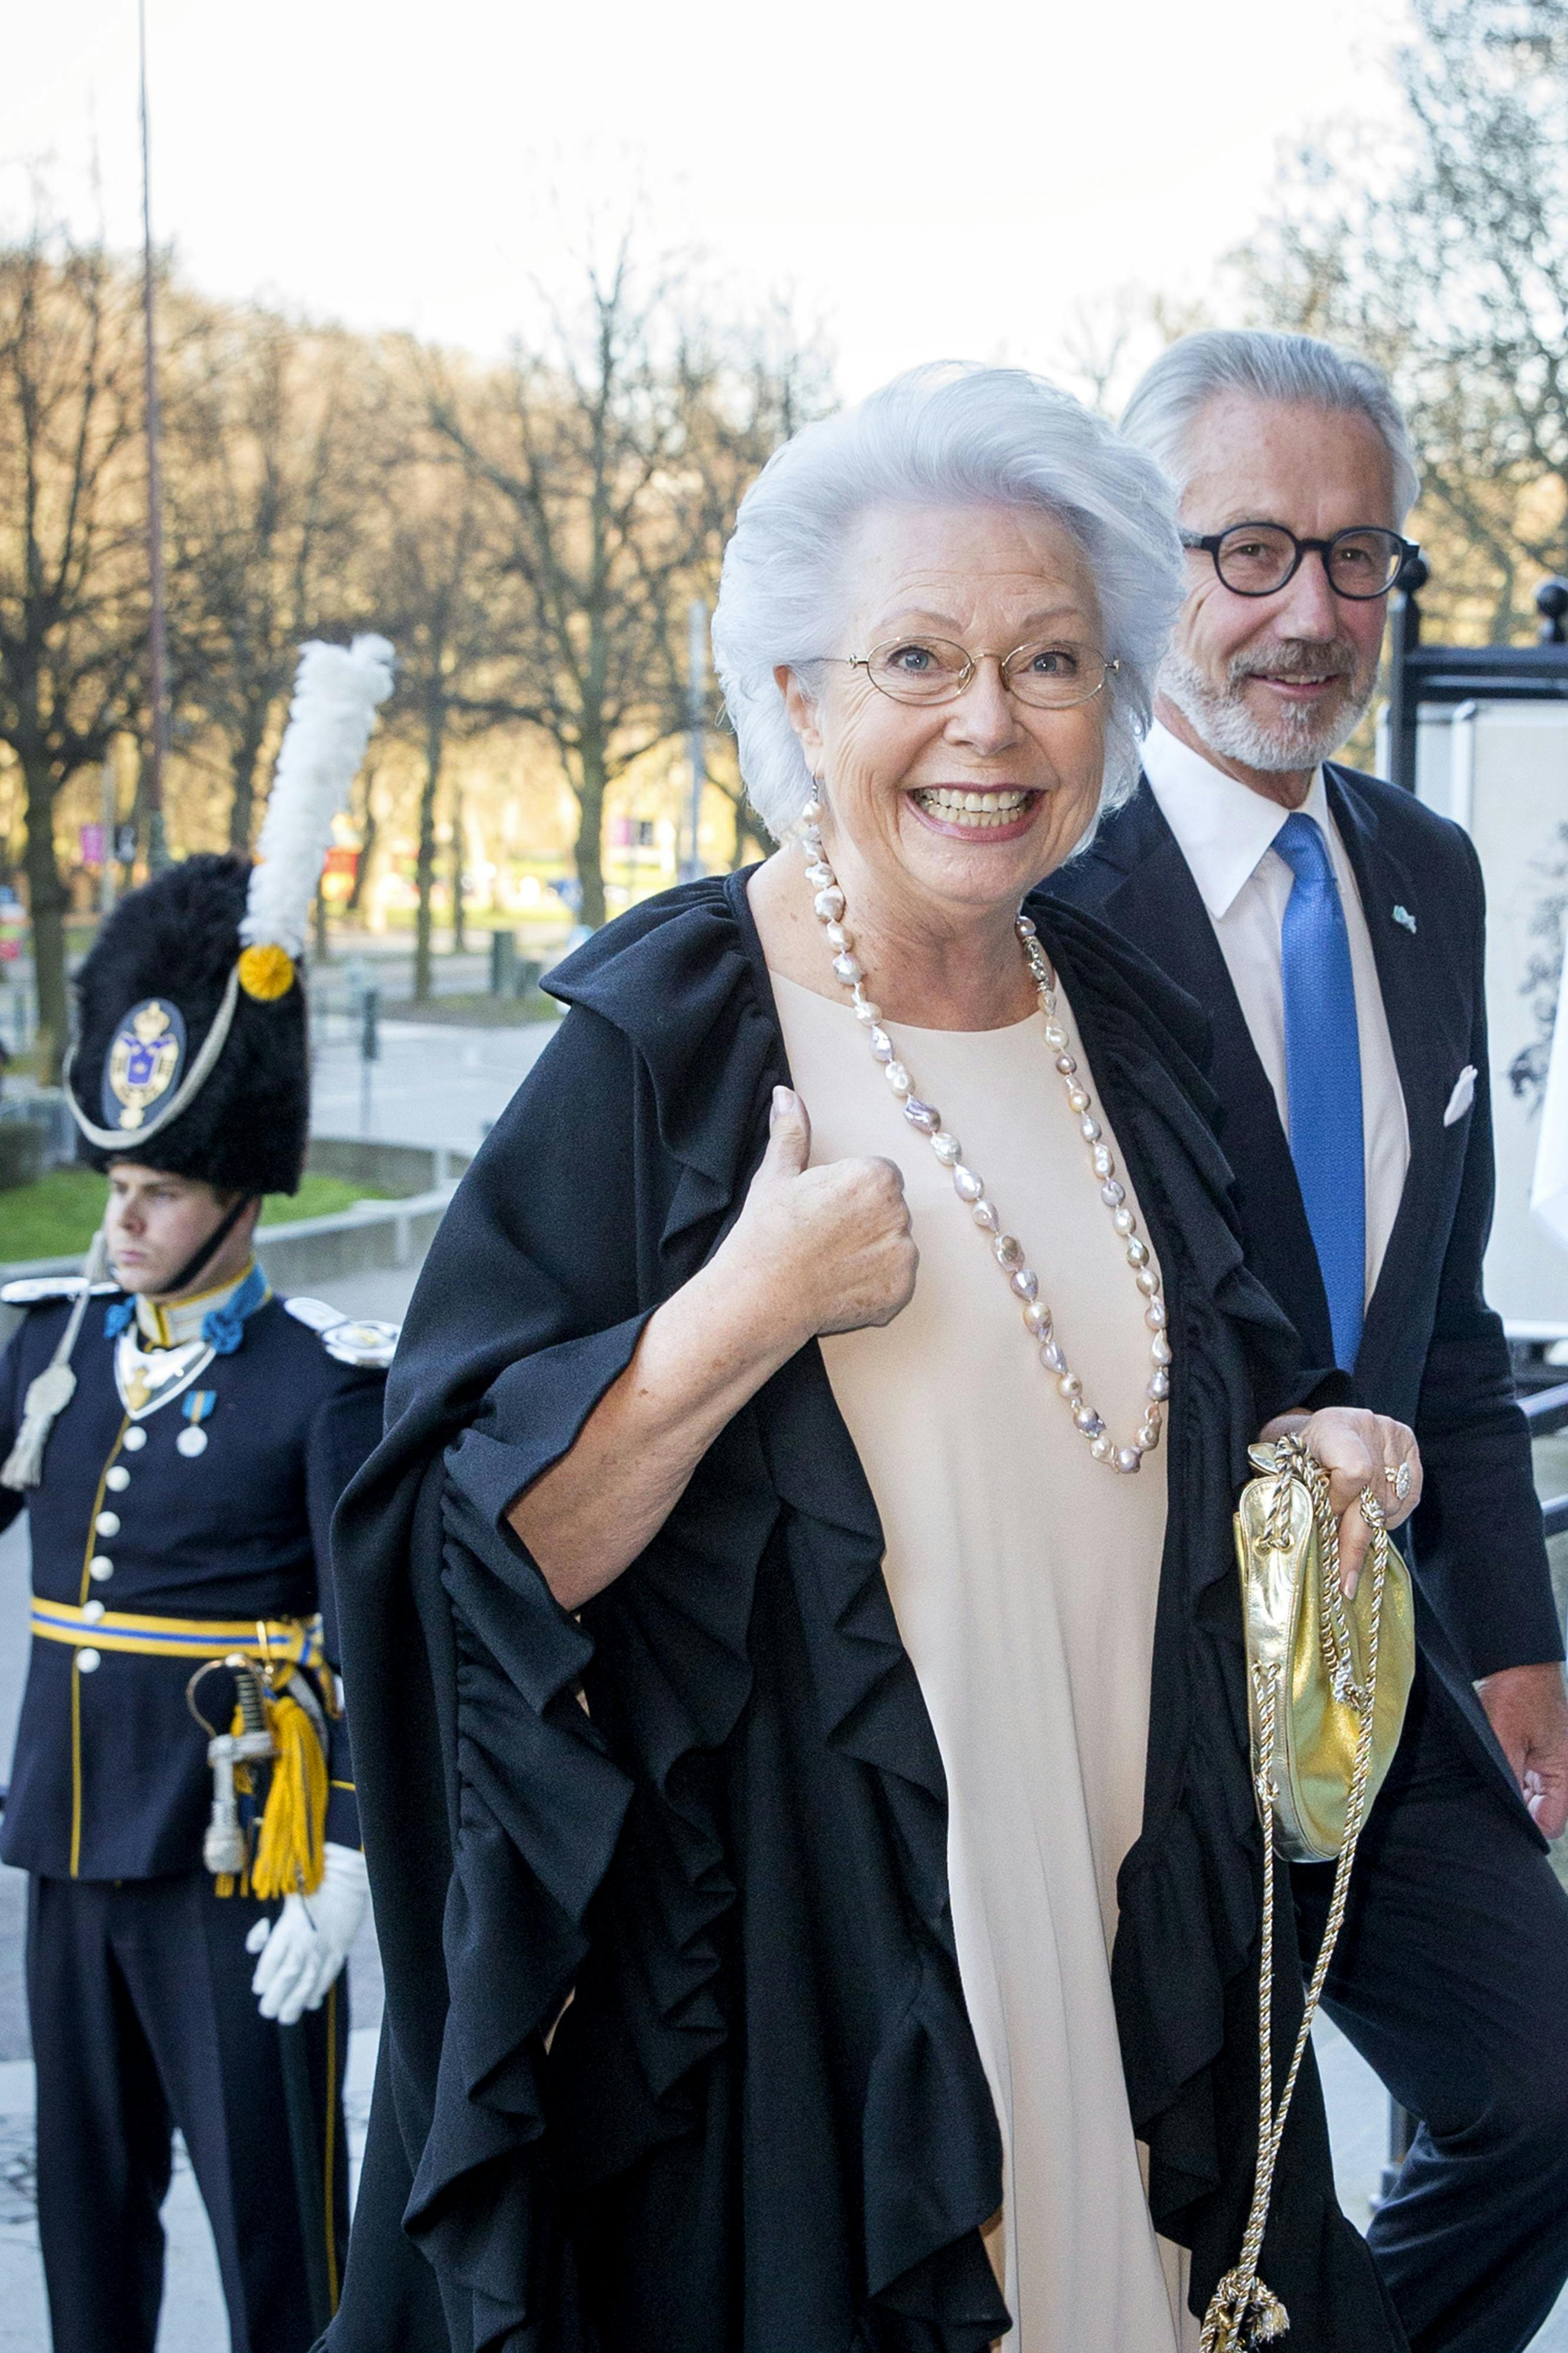 Princess Christina and Tord Magnuson of Sweden arrive at the Nordic museum for the concert by the Royal Swedish Opera and Stockholm Concert on the occasion of the 70th birthday of the Swedish King Carl Gustaf in Stockholm, Sweden, 29 April 2016. Photo by: Patrick van Katwijk/picture-alliance/dpa/AP Images